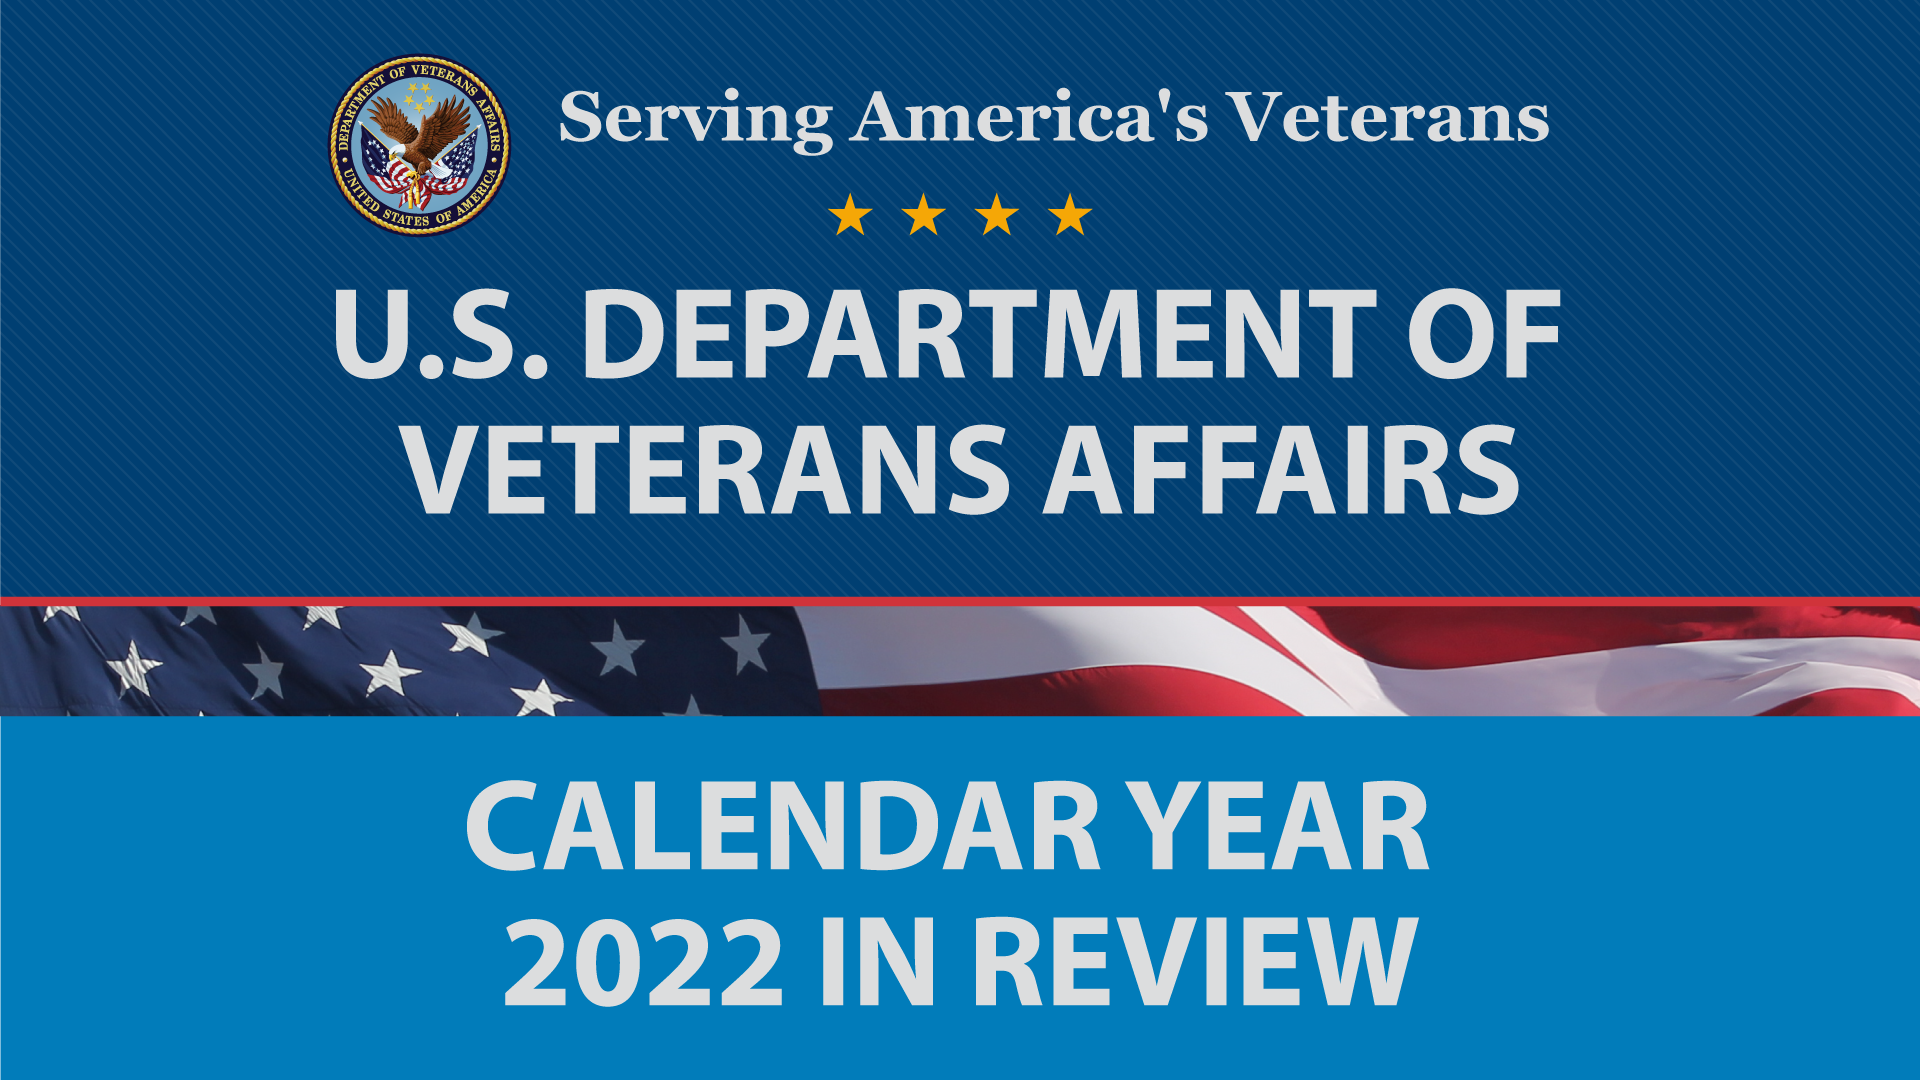 The Year 2022 may be winding down, but VA’s commitment to Veterans will